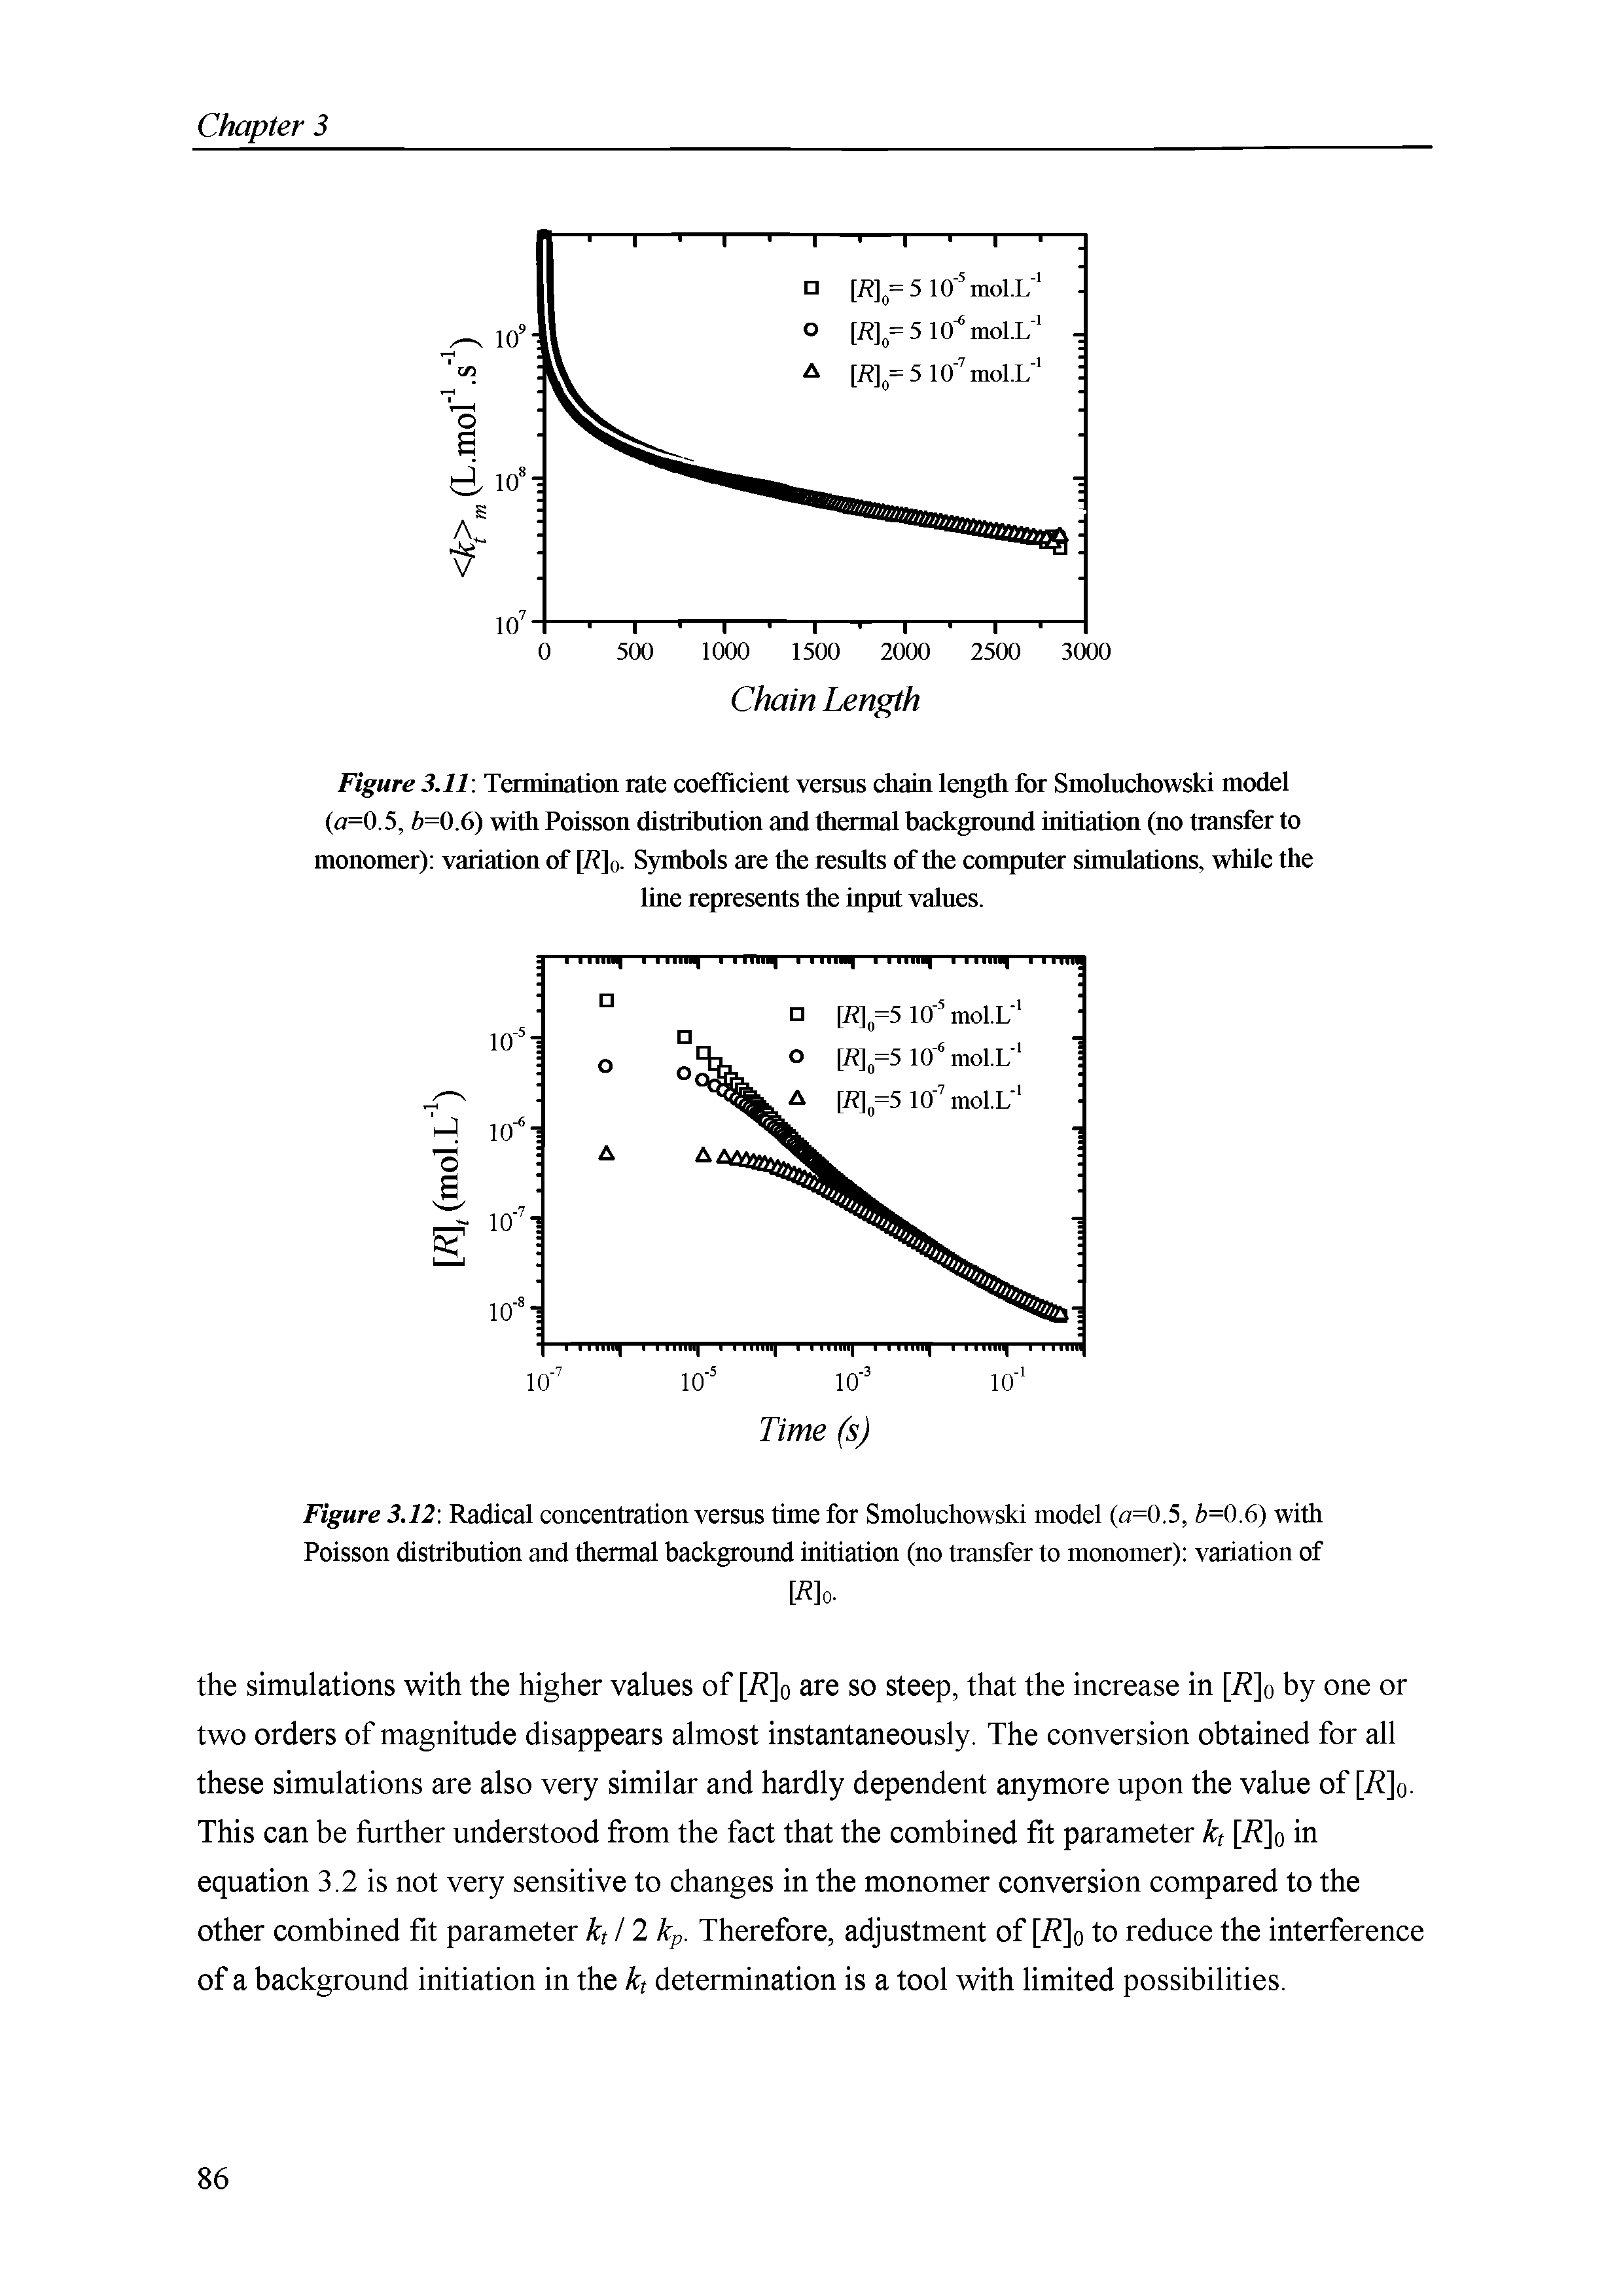 Figure 3.11 Temunation rate coefficient versus chain length for Smoluchowski model (o=0.5, b=0.6) with Poisson distribution and thermal background initiation (no transfer to monomer) variation of [i ]o. Symbols are the results of the computer simulations, while the...